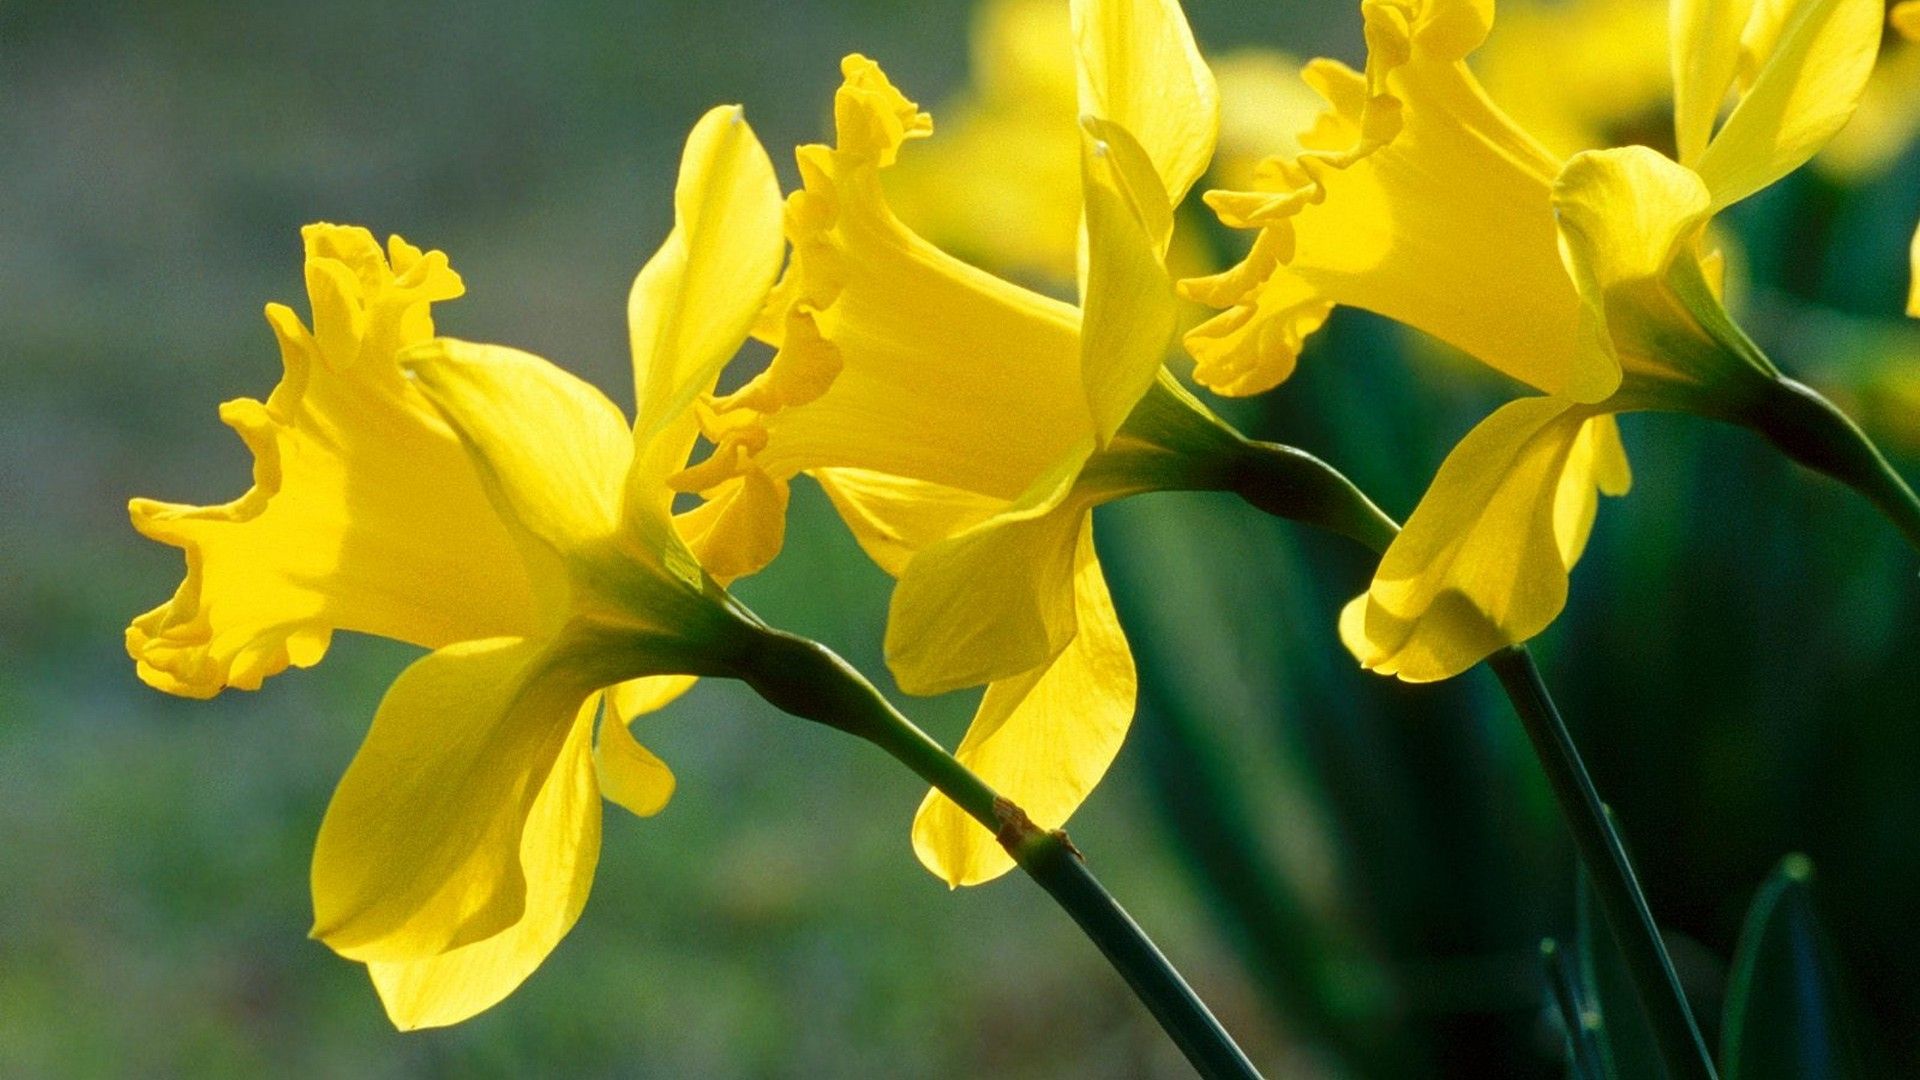 Desktop Wallpaper Yellow Flowers, Daffodil, Narcissus, HD Image, Picture, Background, Uzmdfn